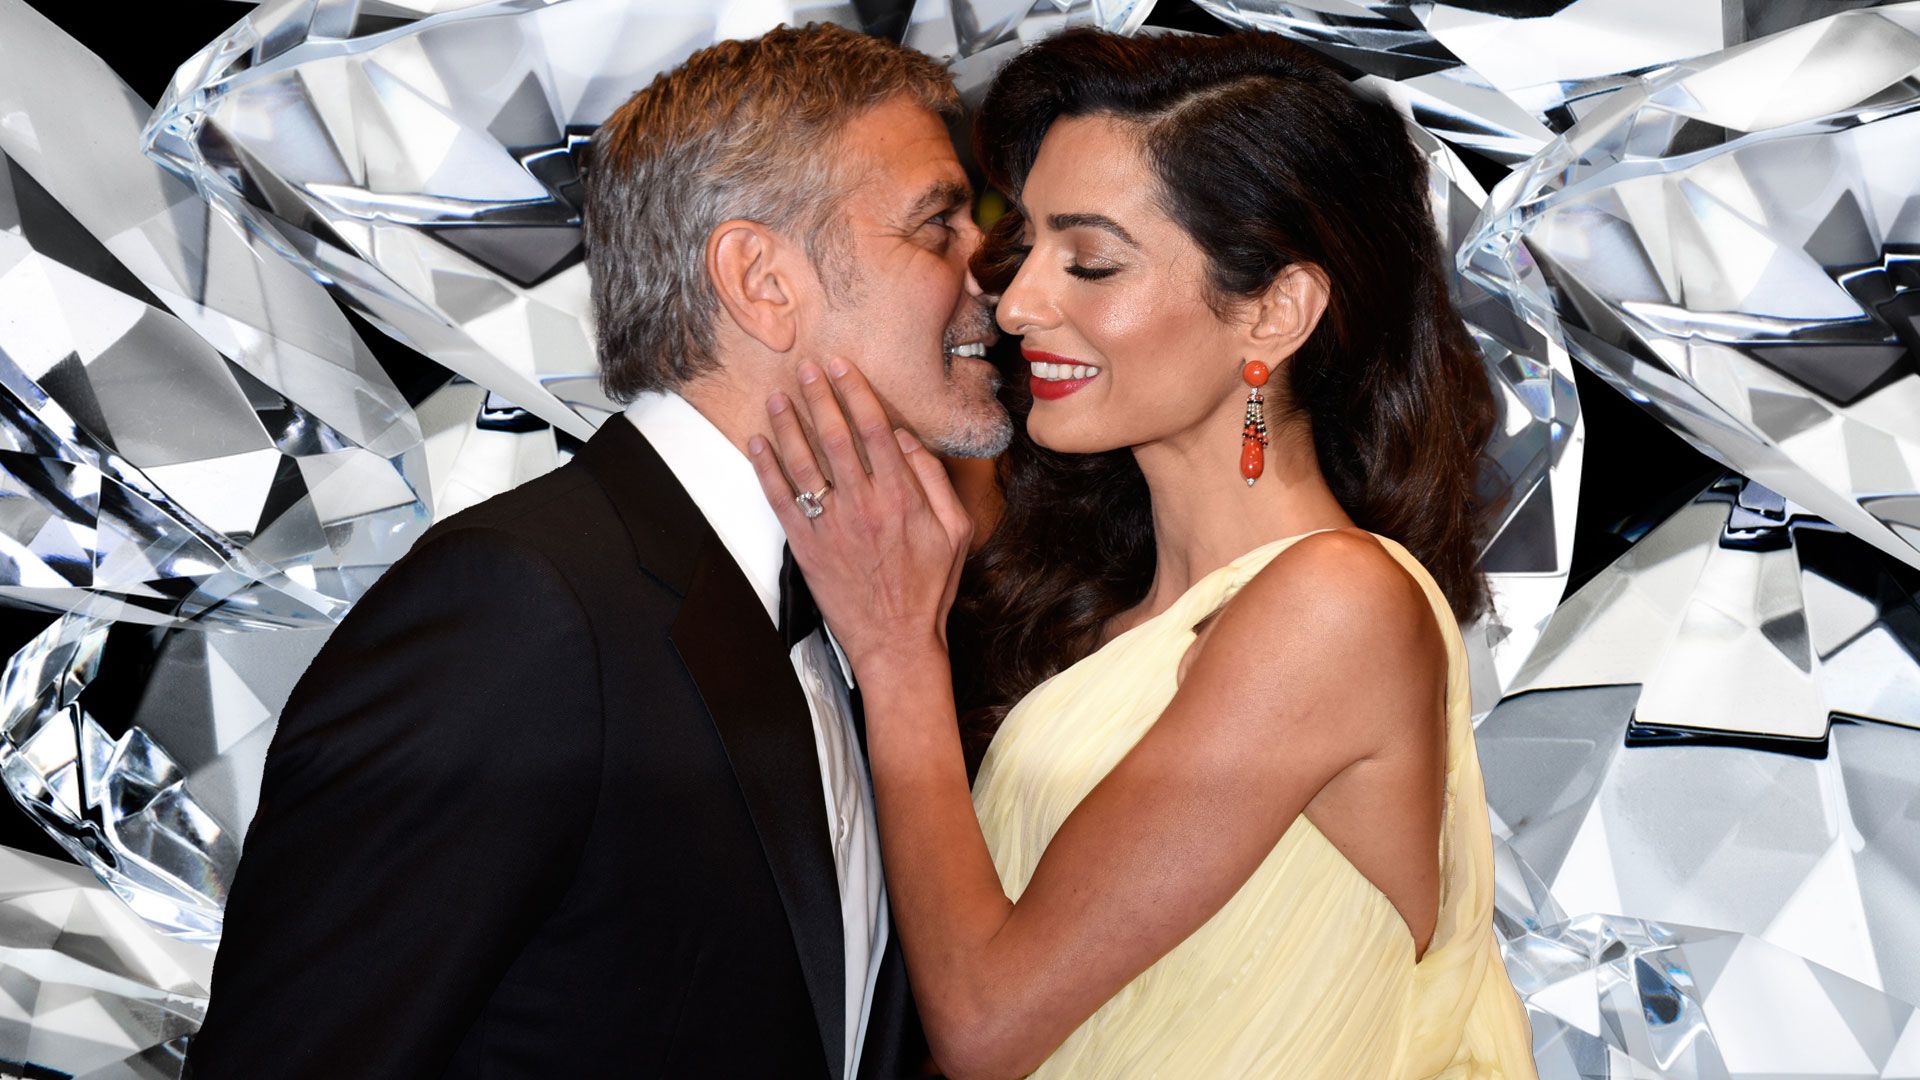 Amal Clooney's giant $500k 'ethical' engagement ring from husband George